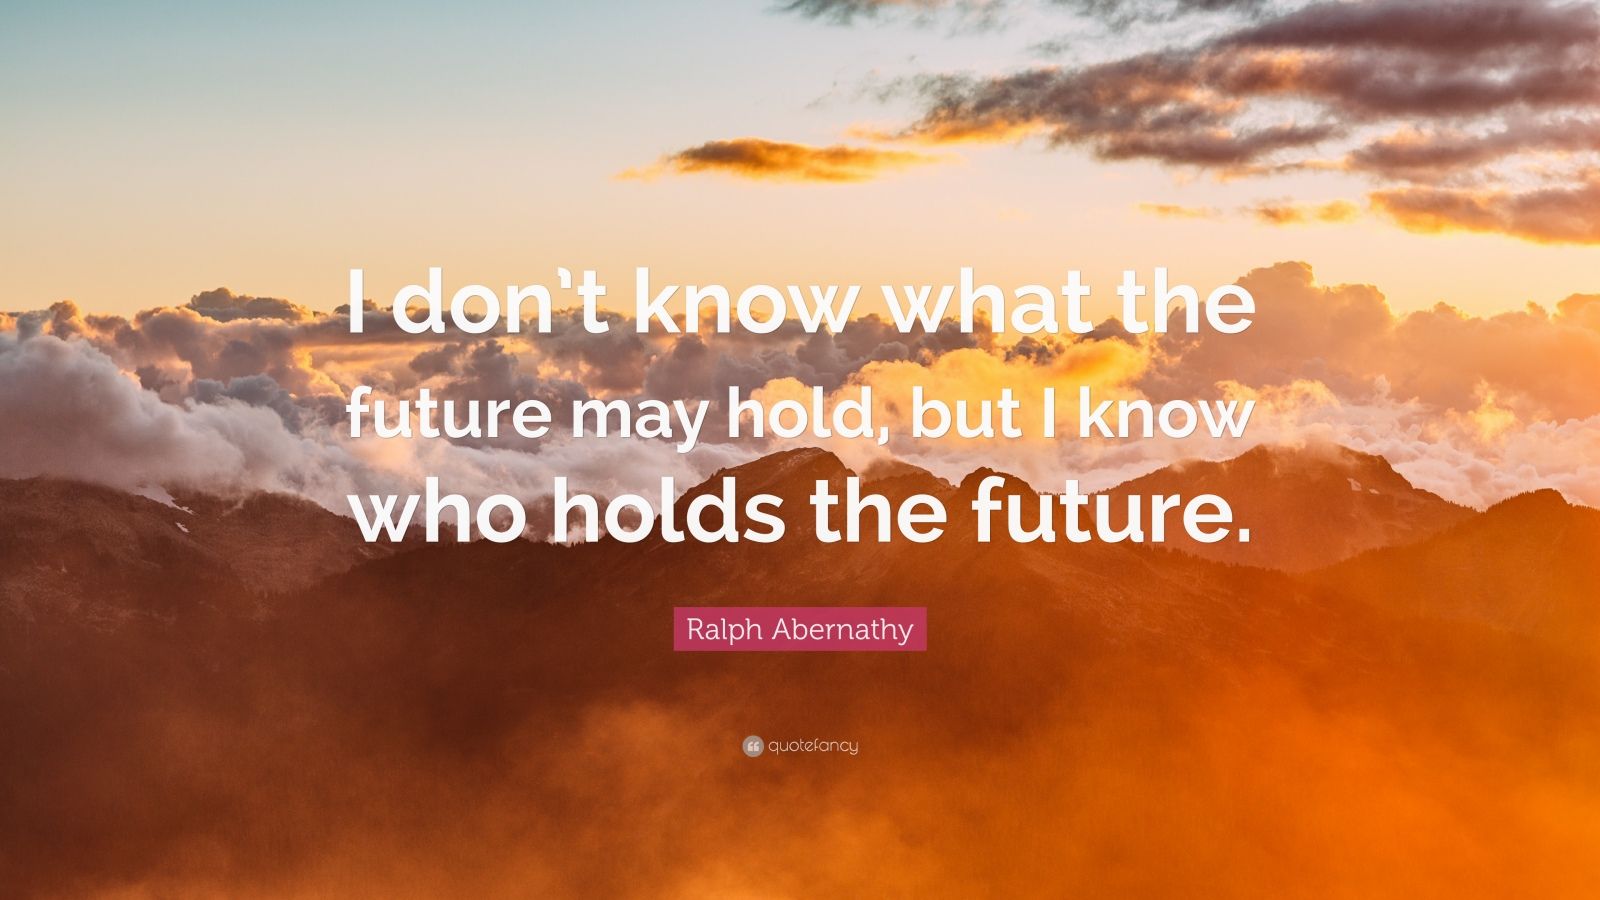 Ralph Abernathy Quote: “I don’t know what the future may hold, but I